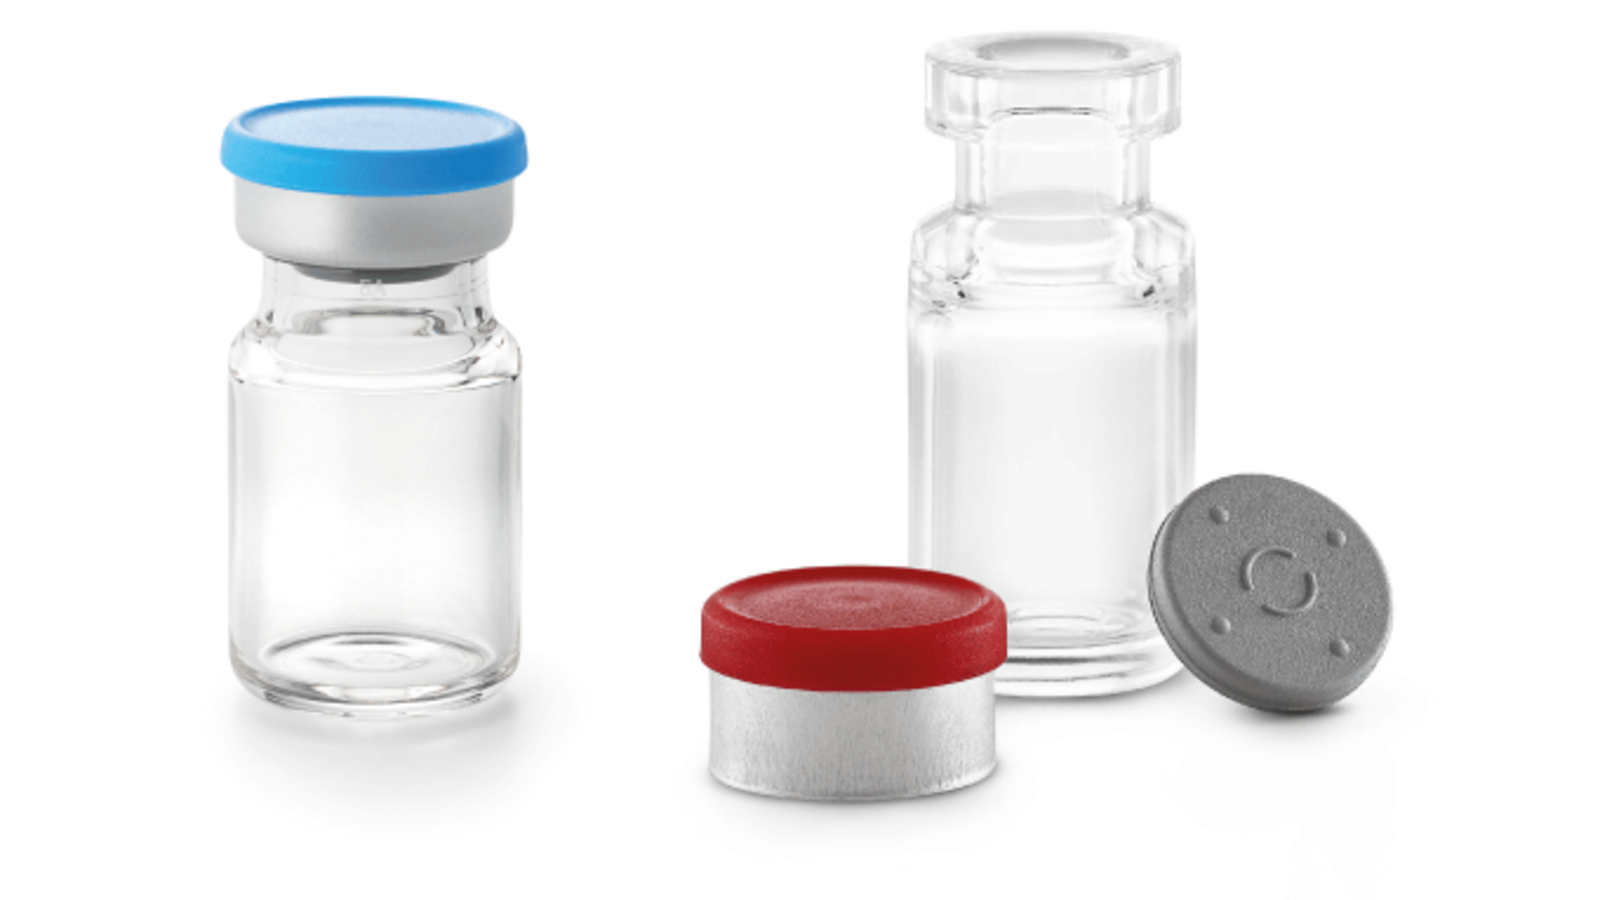 vial stopper, red and blue flip-off caps